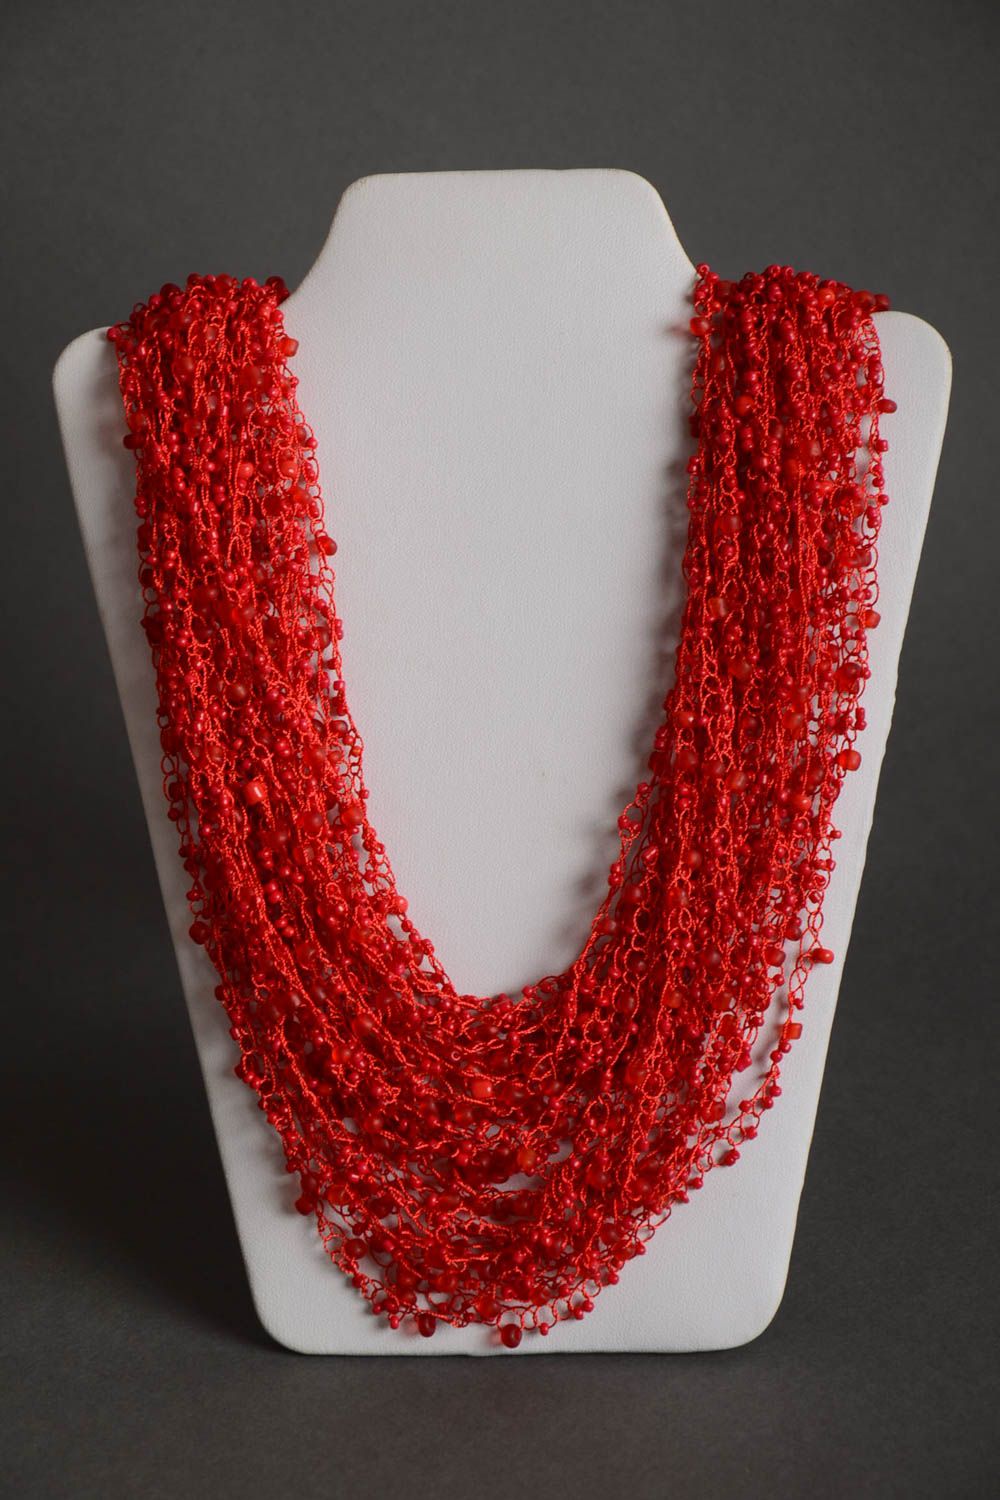 Handmade designer multi row volume airy bright red necklace crocheted of beads photo 2